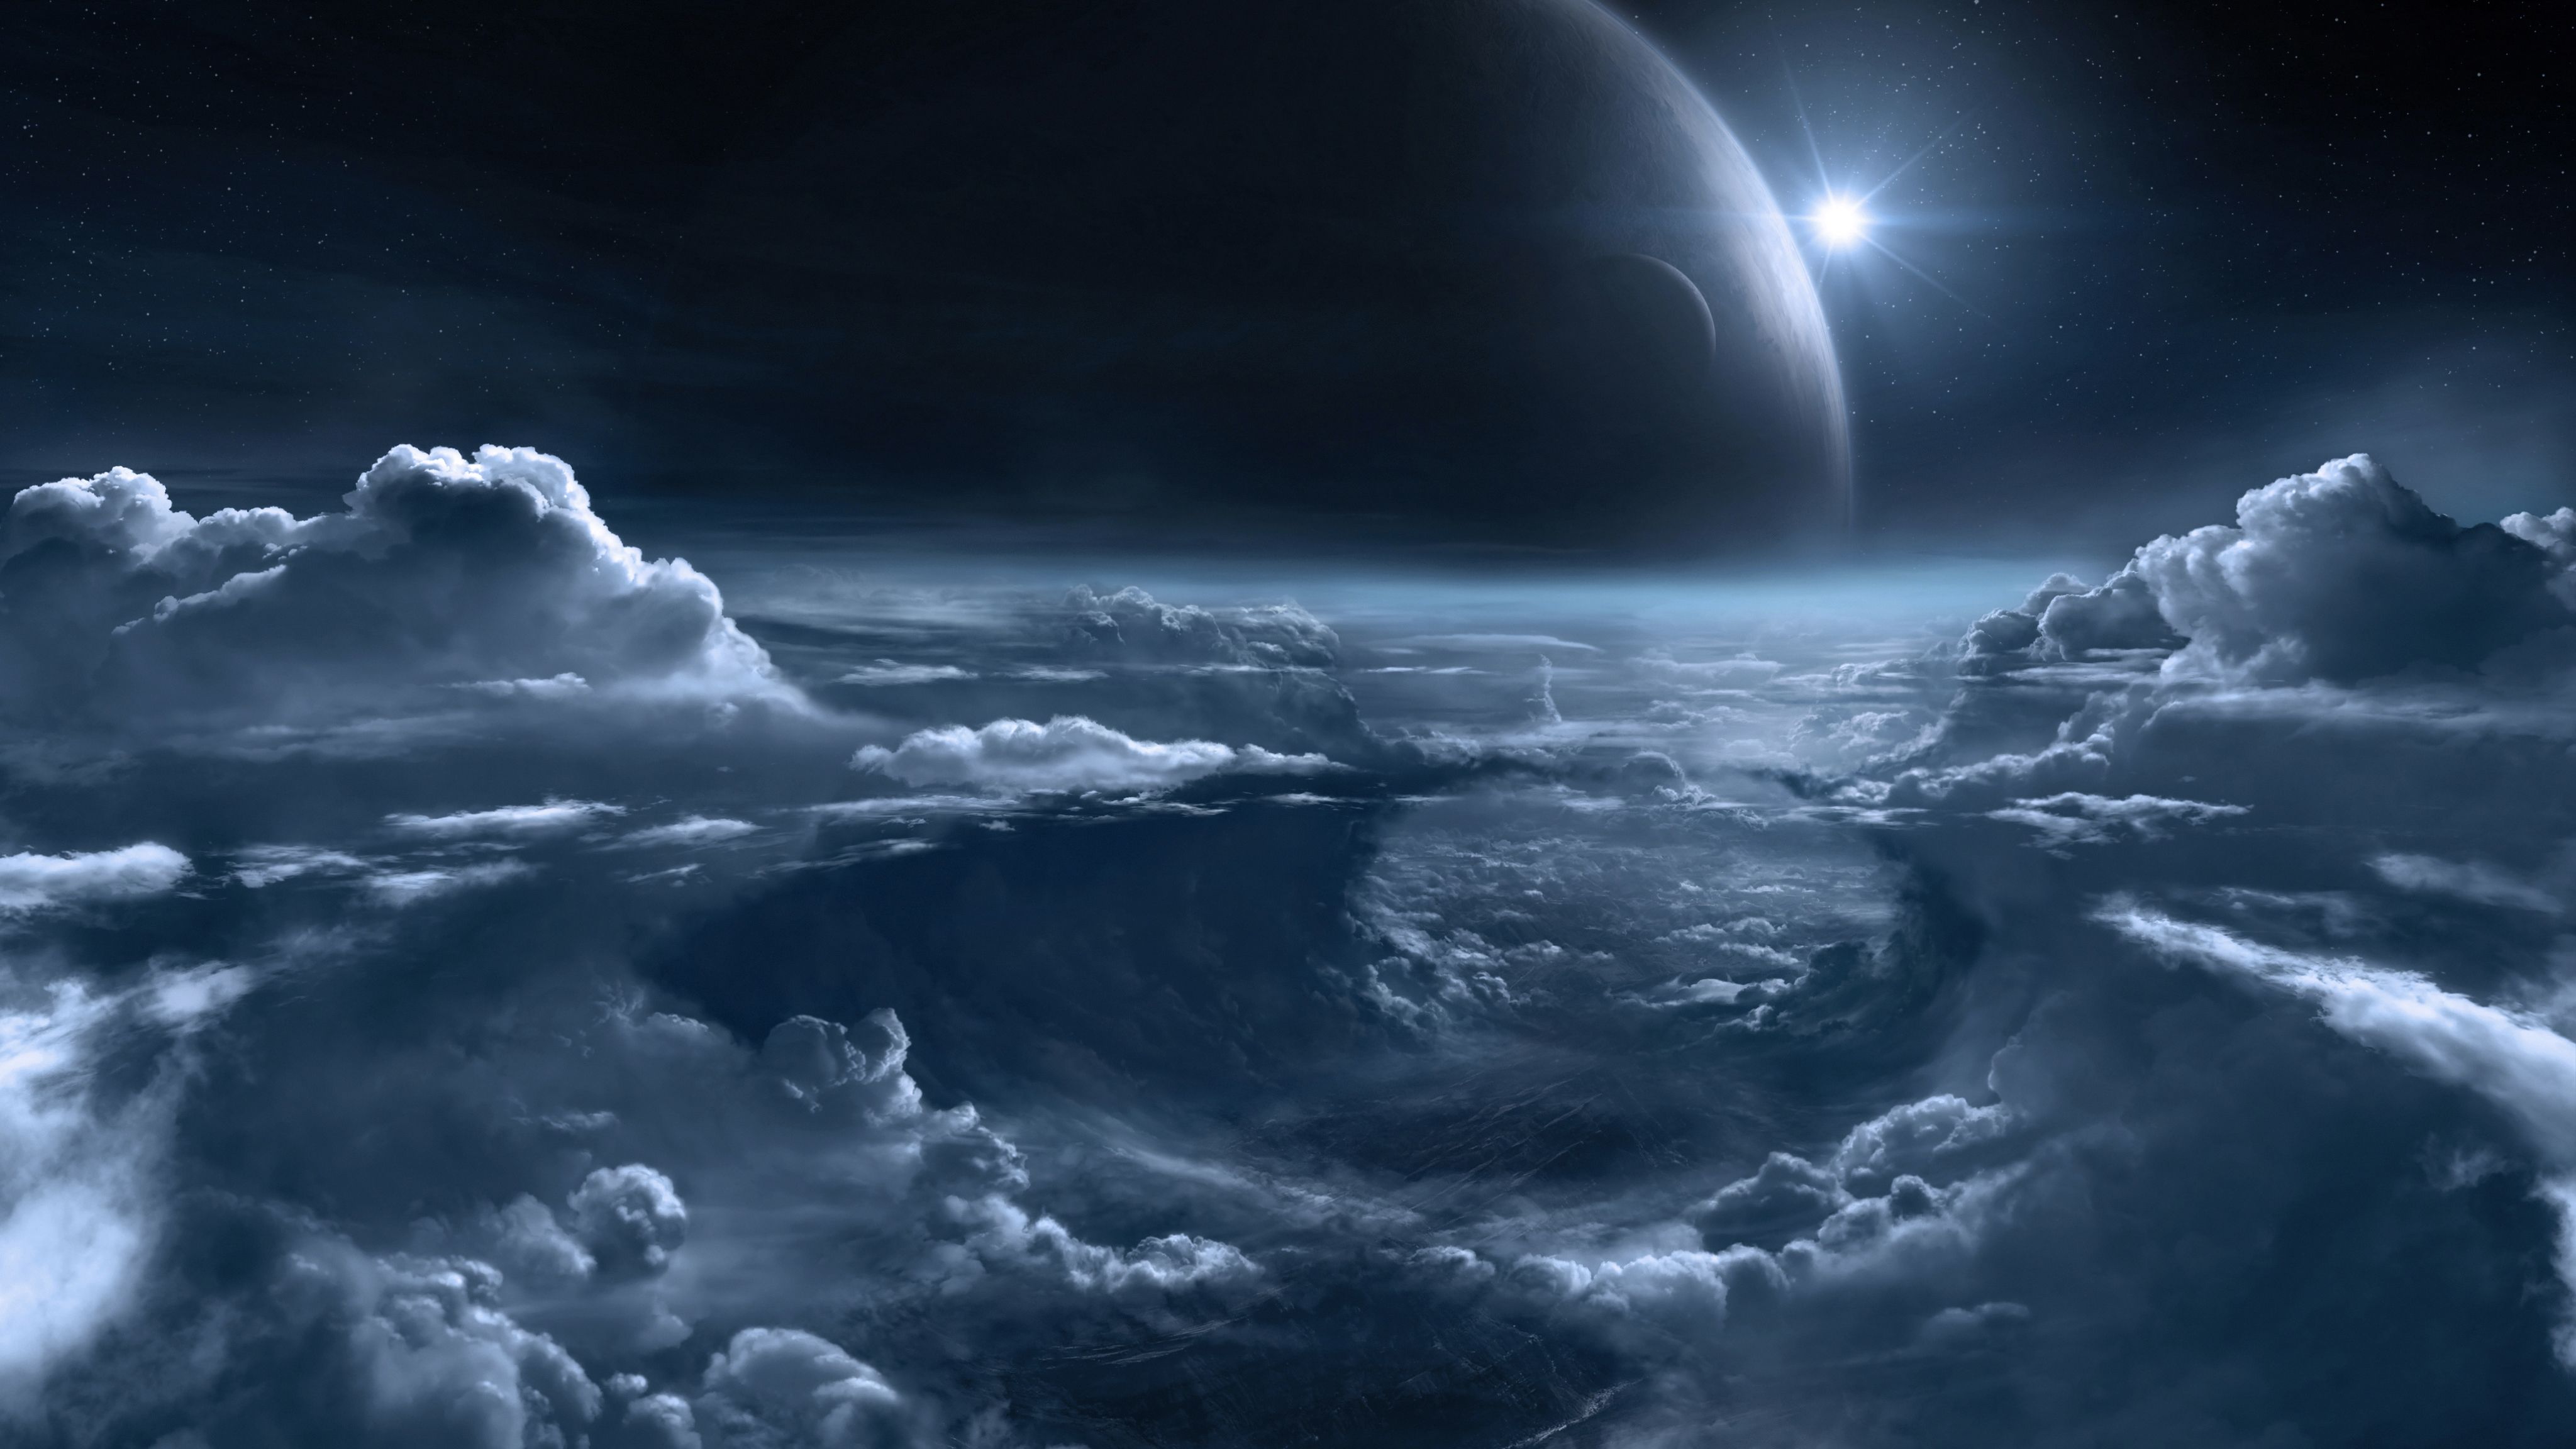 General 4096x2304 clouds science fiction planet